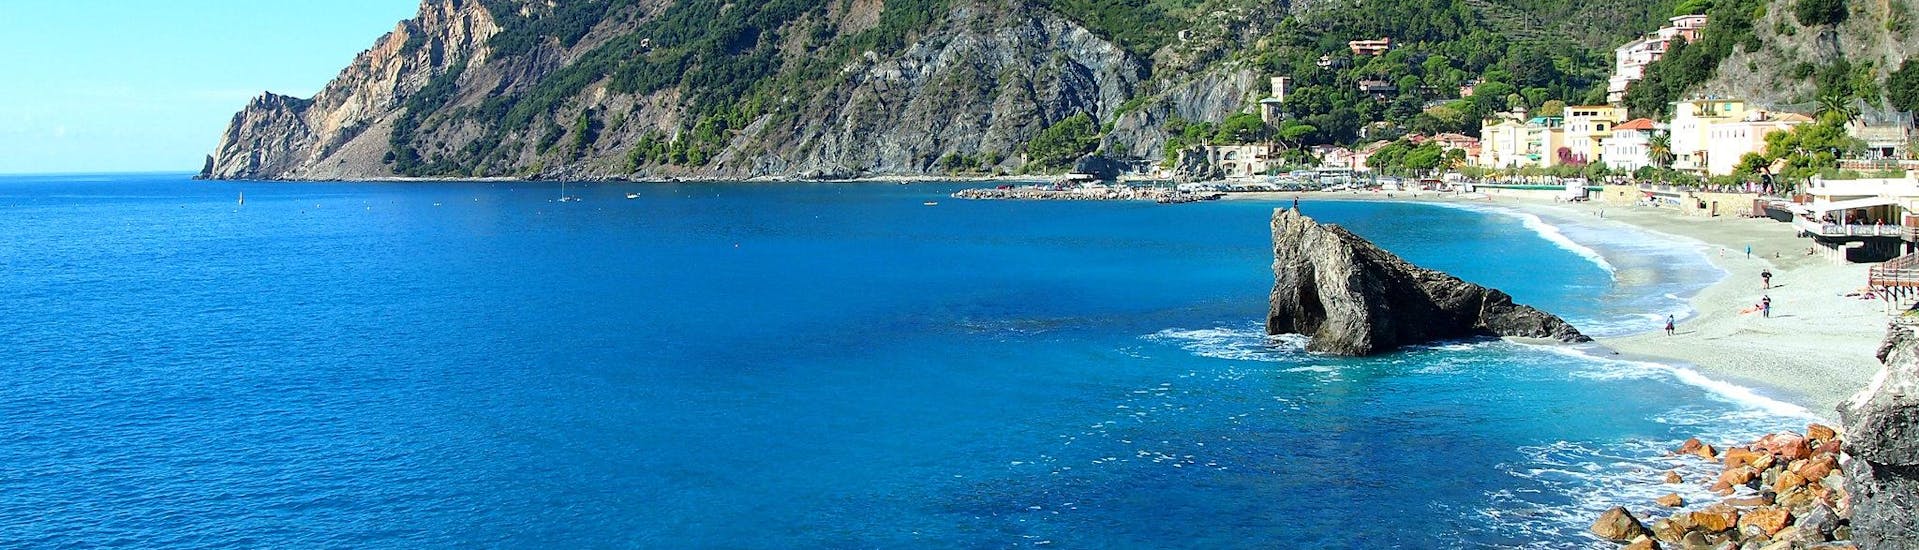 View of the coast during a boat trip to Monterosso al Mare.